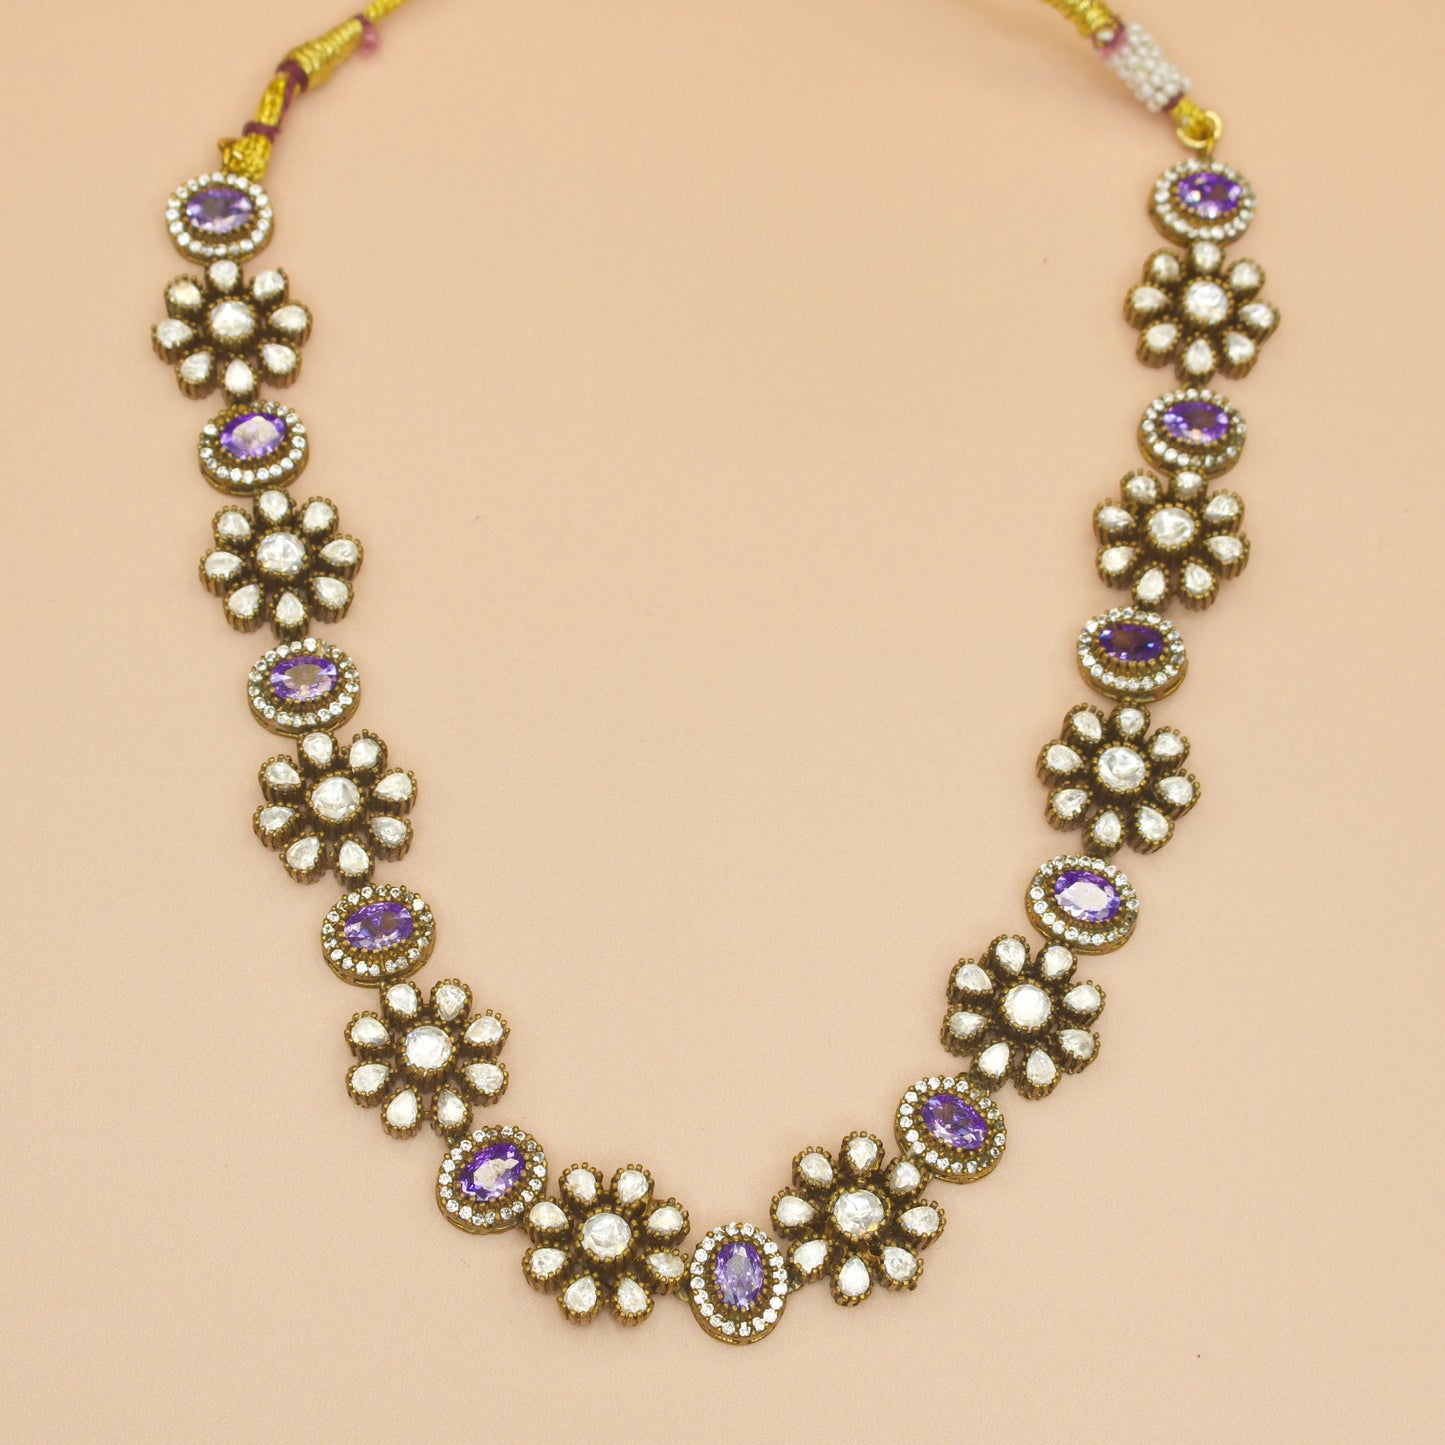 Floral Victorian Necklace Set in purple & green colour